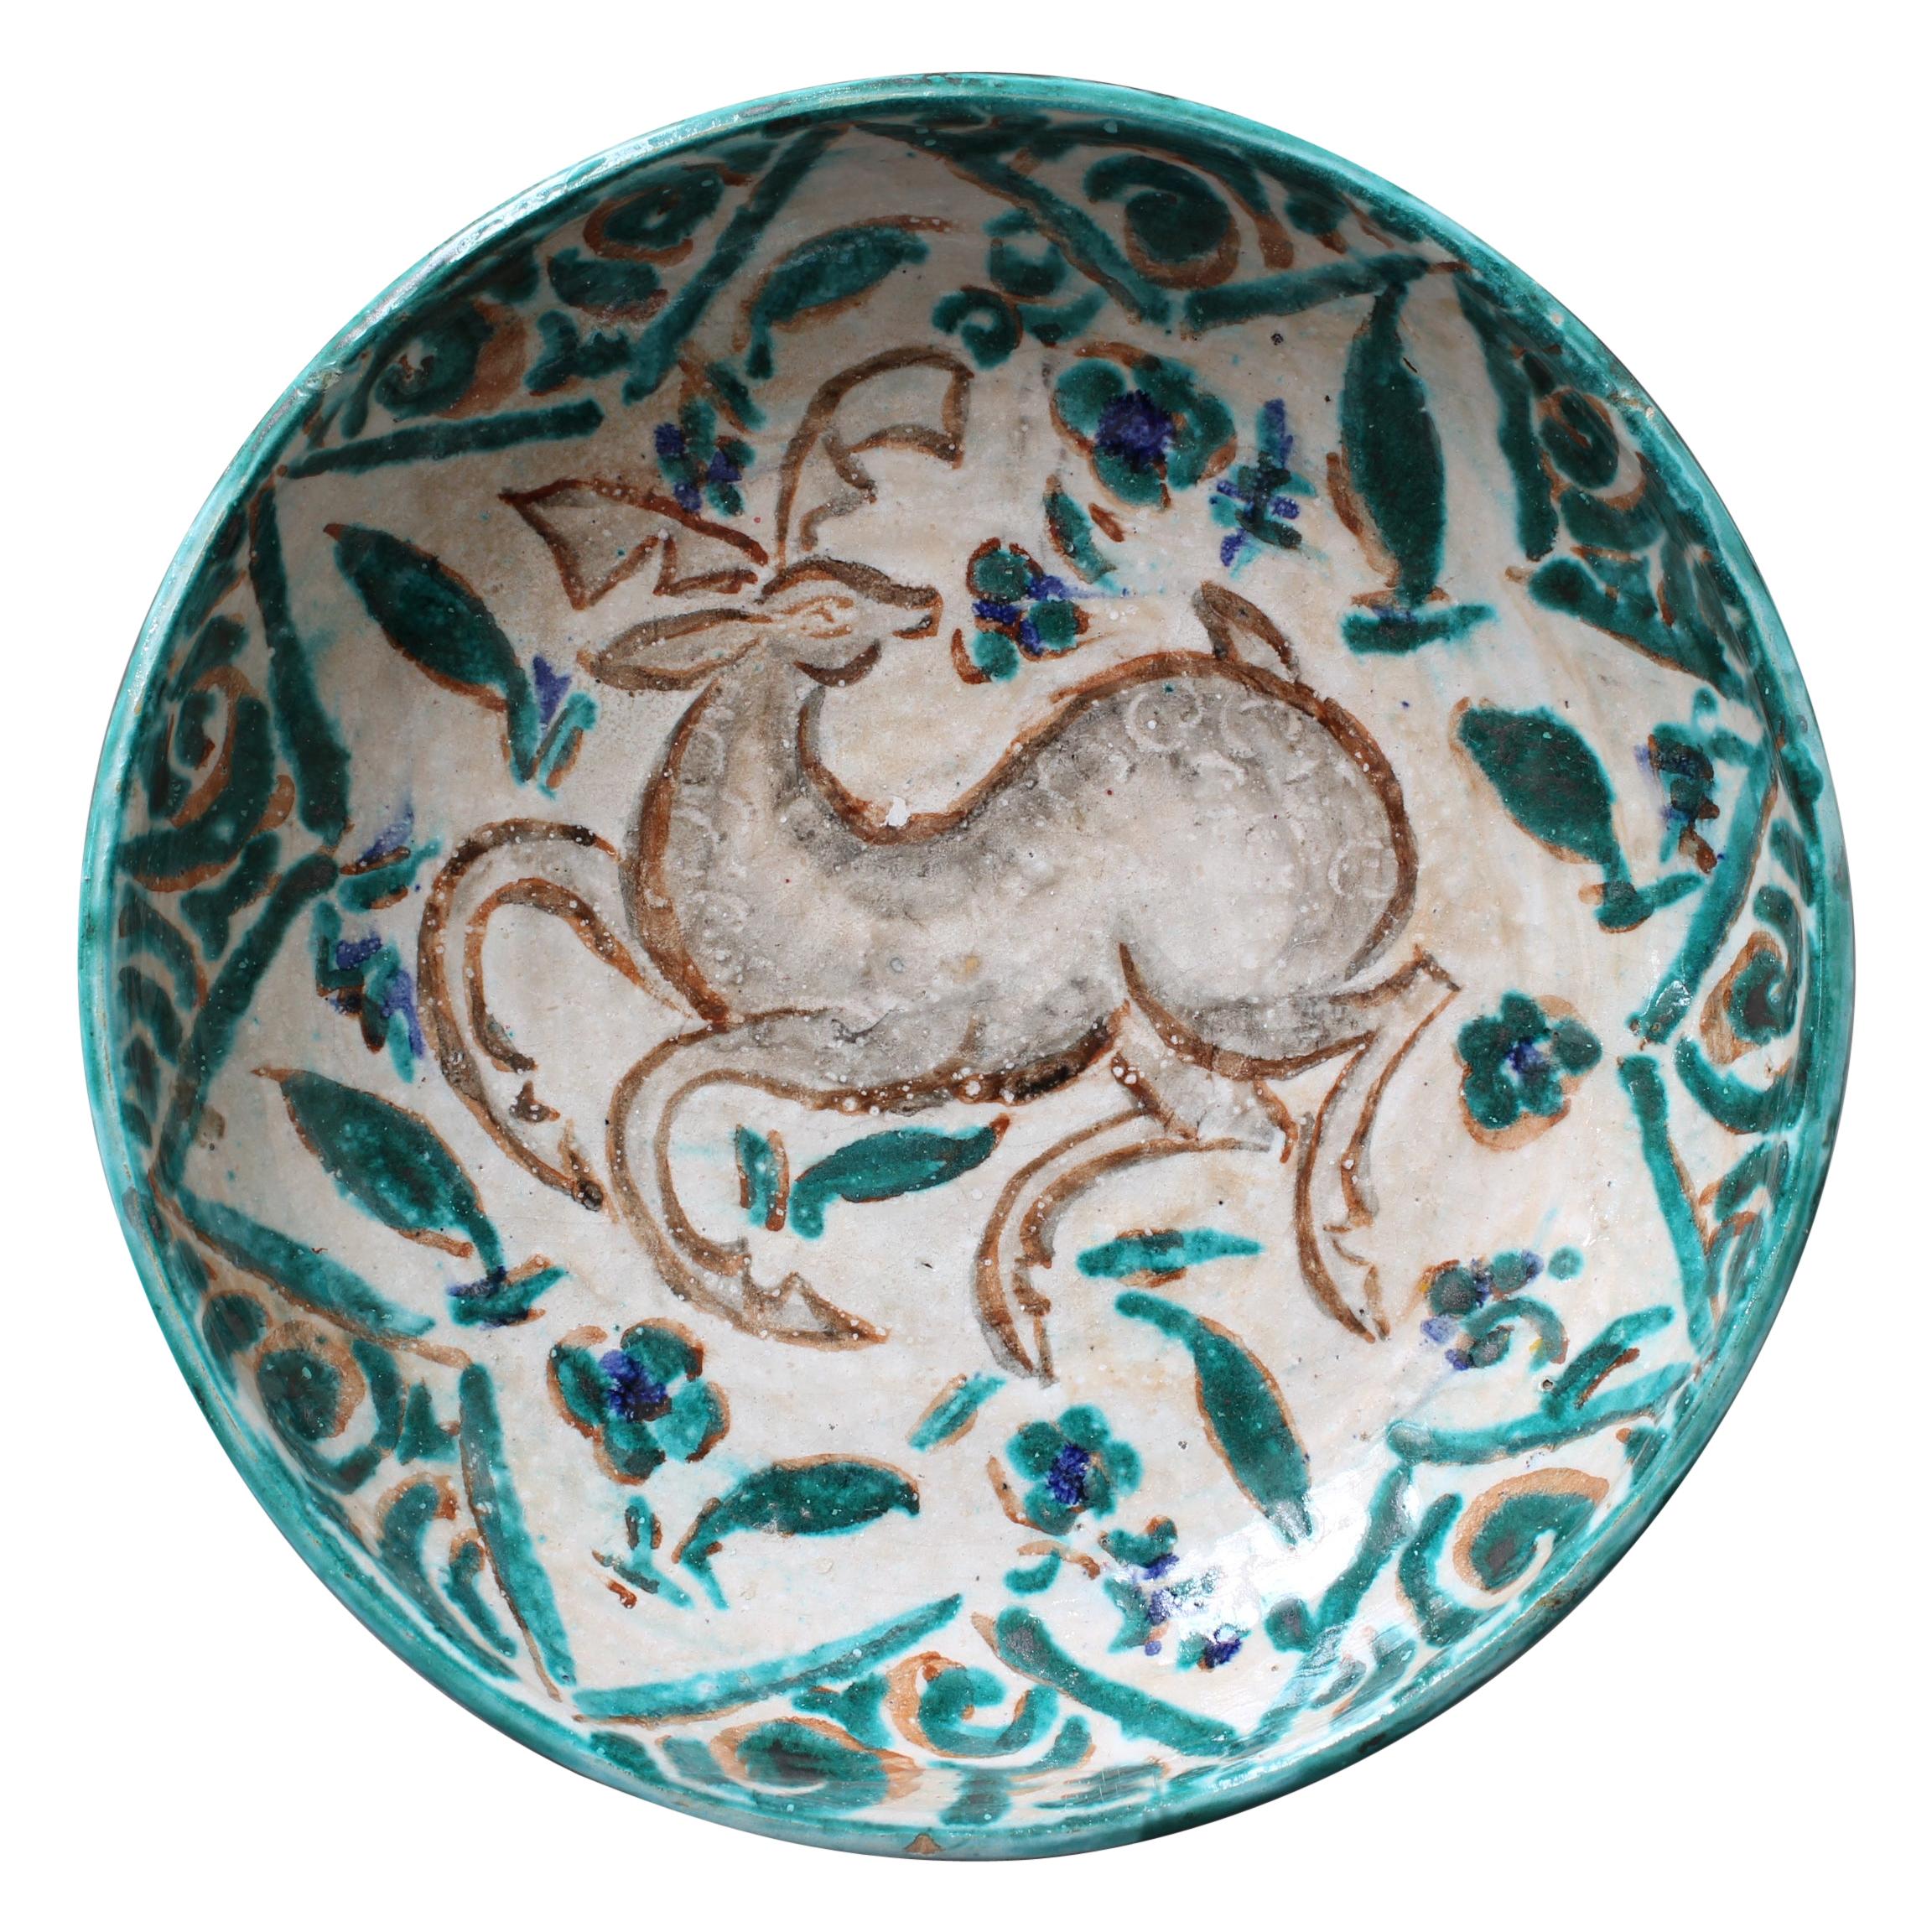 French Persian-Inspired Ceramic Bowl by Édouard Cazaux, circa 1930s